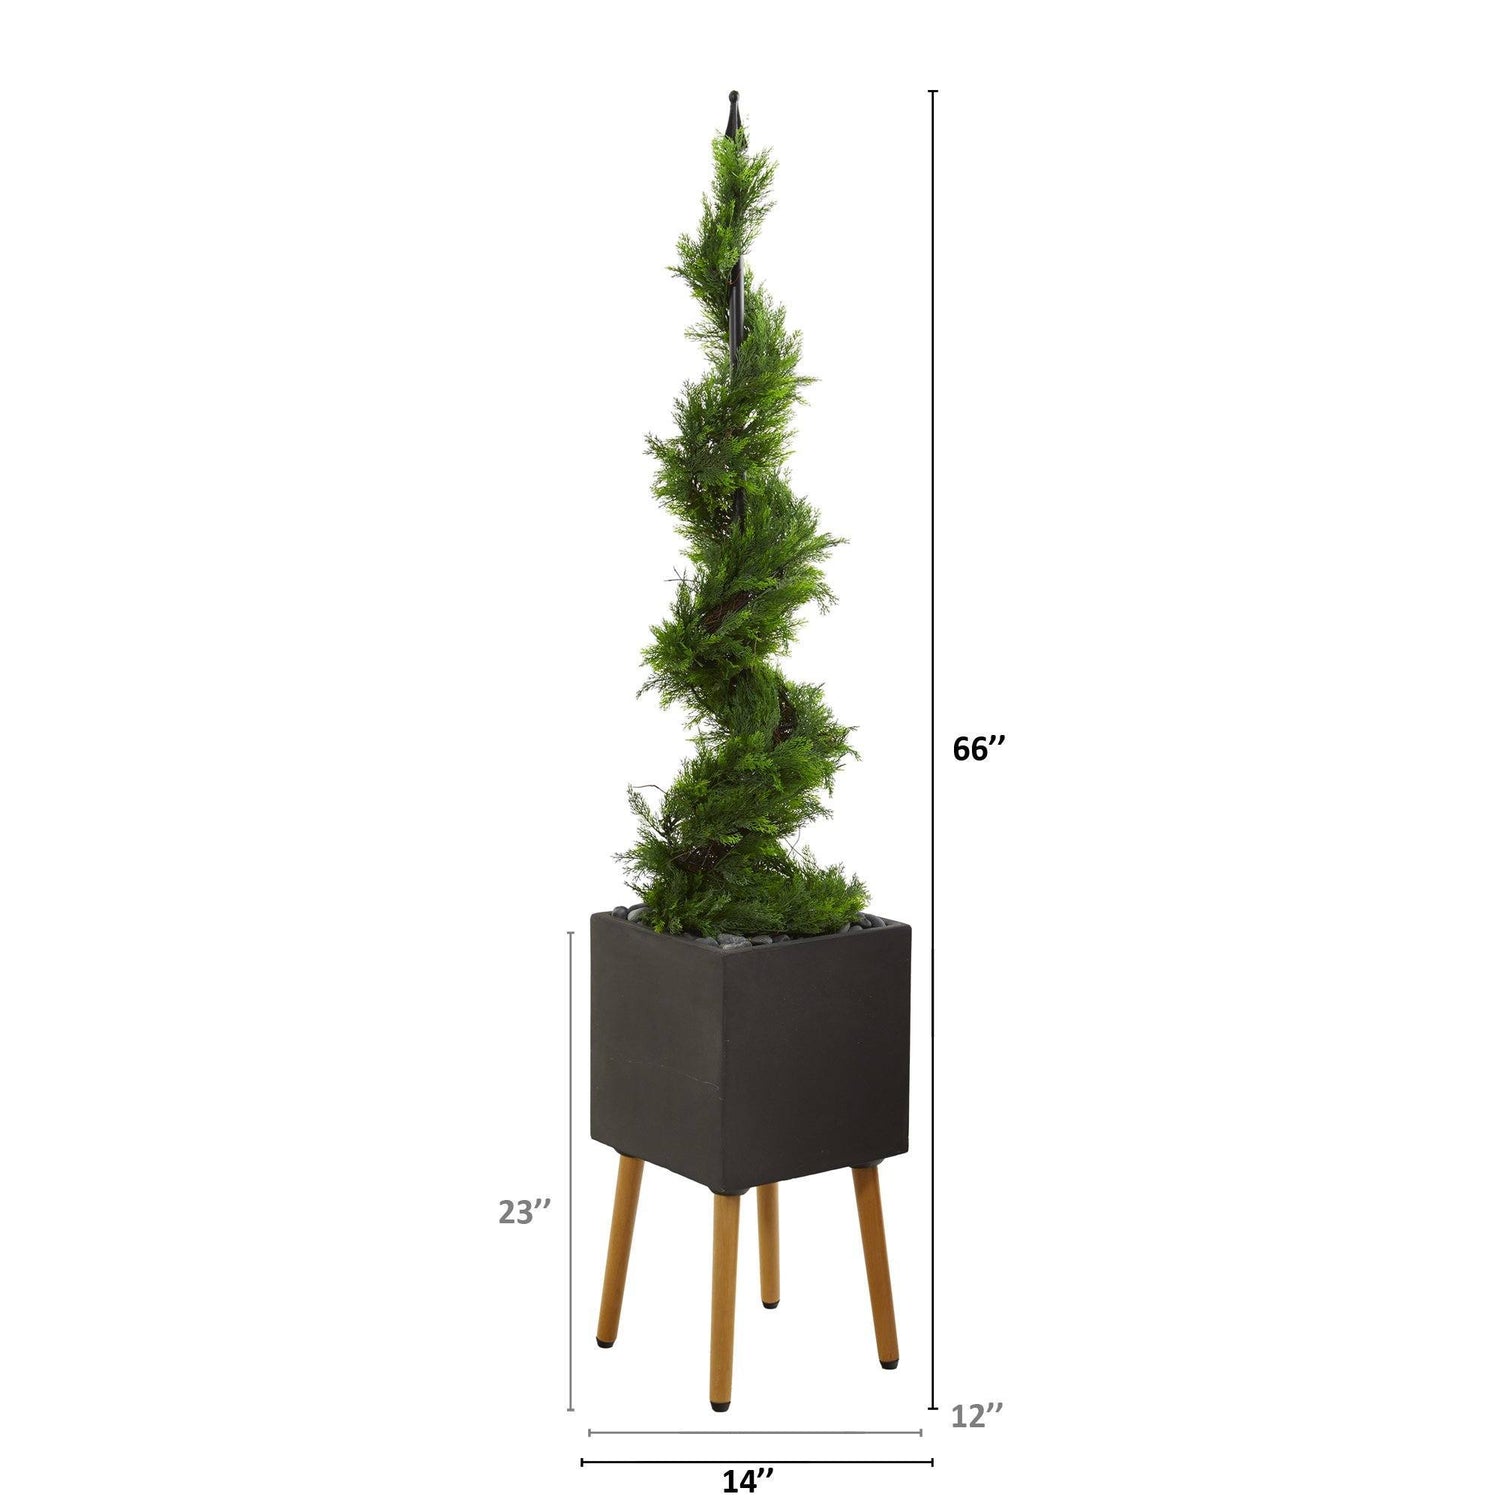 5.5’ Cypress Artificial Spiral Topiary Tree in Black Planter with Stand